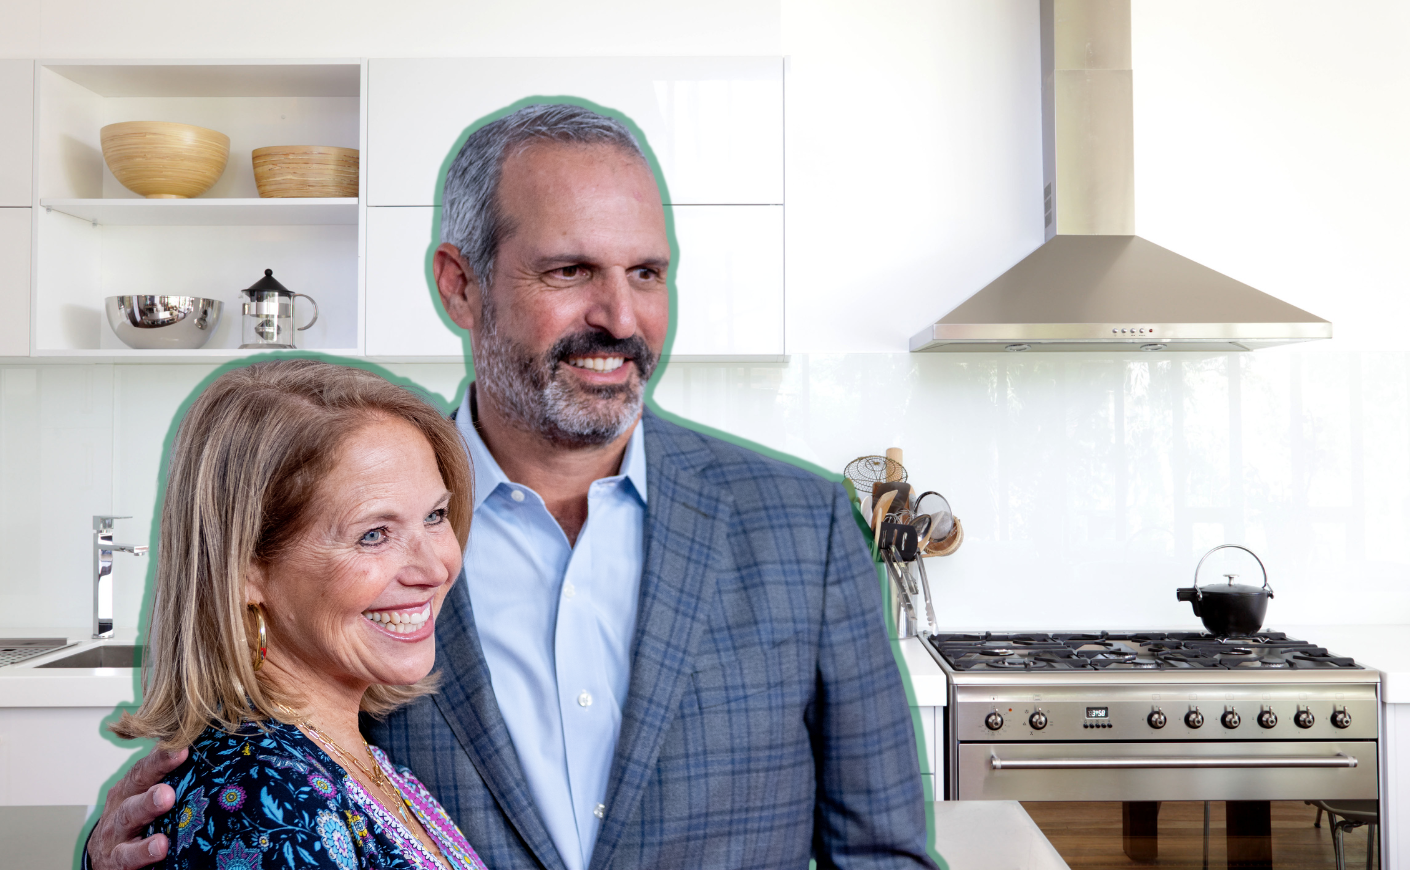 Katie Couric and John Molner in the kitchen